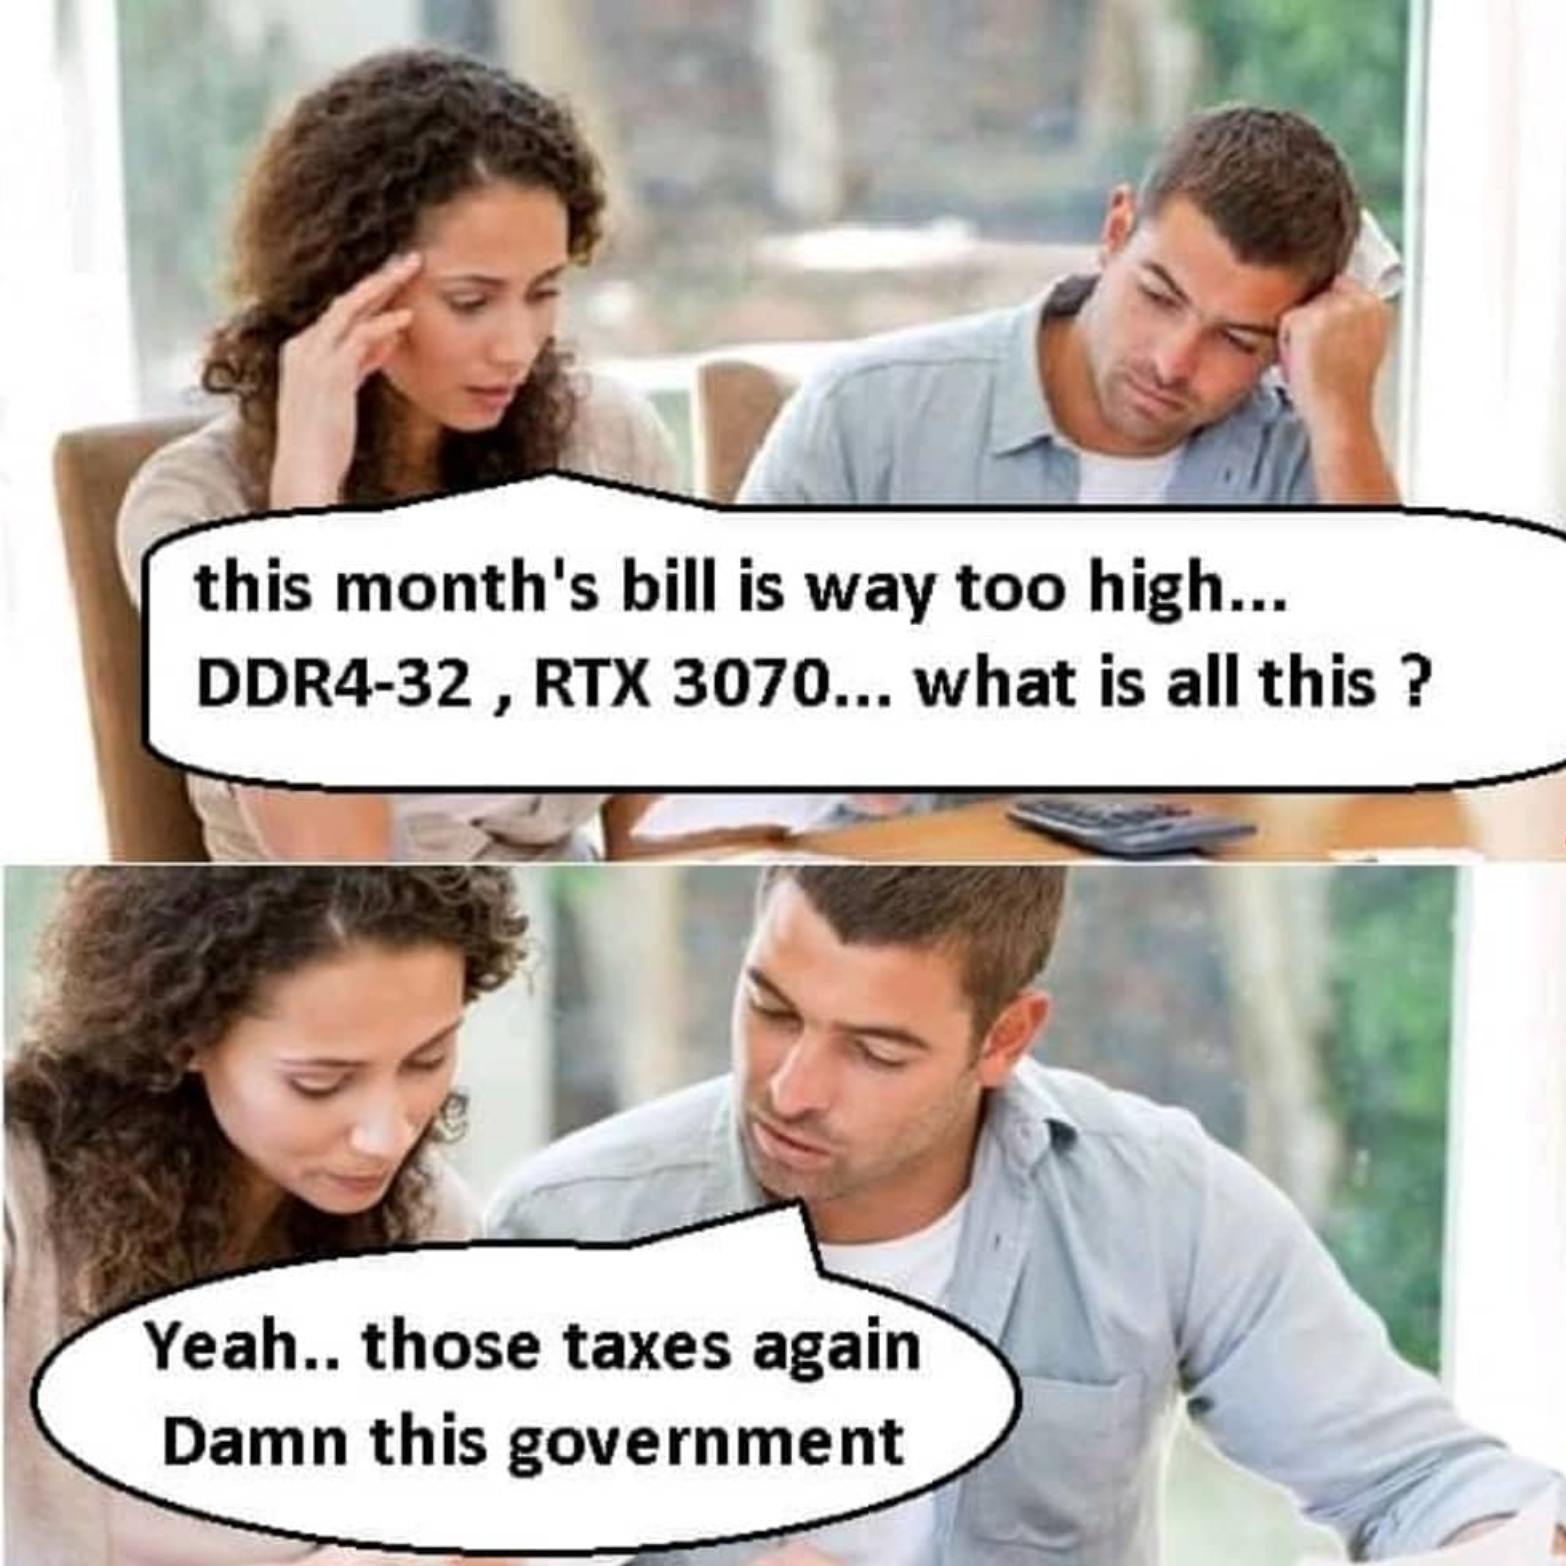 funny gaming memes - conversation - this month's bill is way too high... DDR432, Rtx 3070... what is all this? Yeah.. those taxes again Damn this government